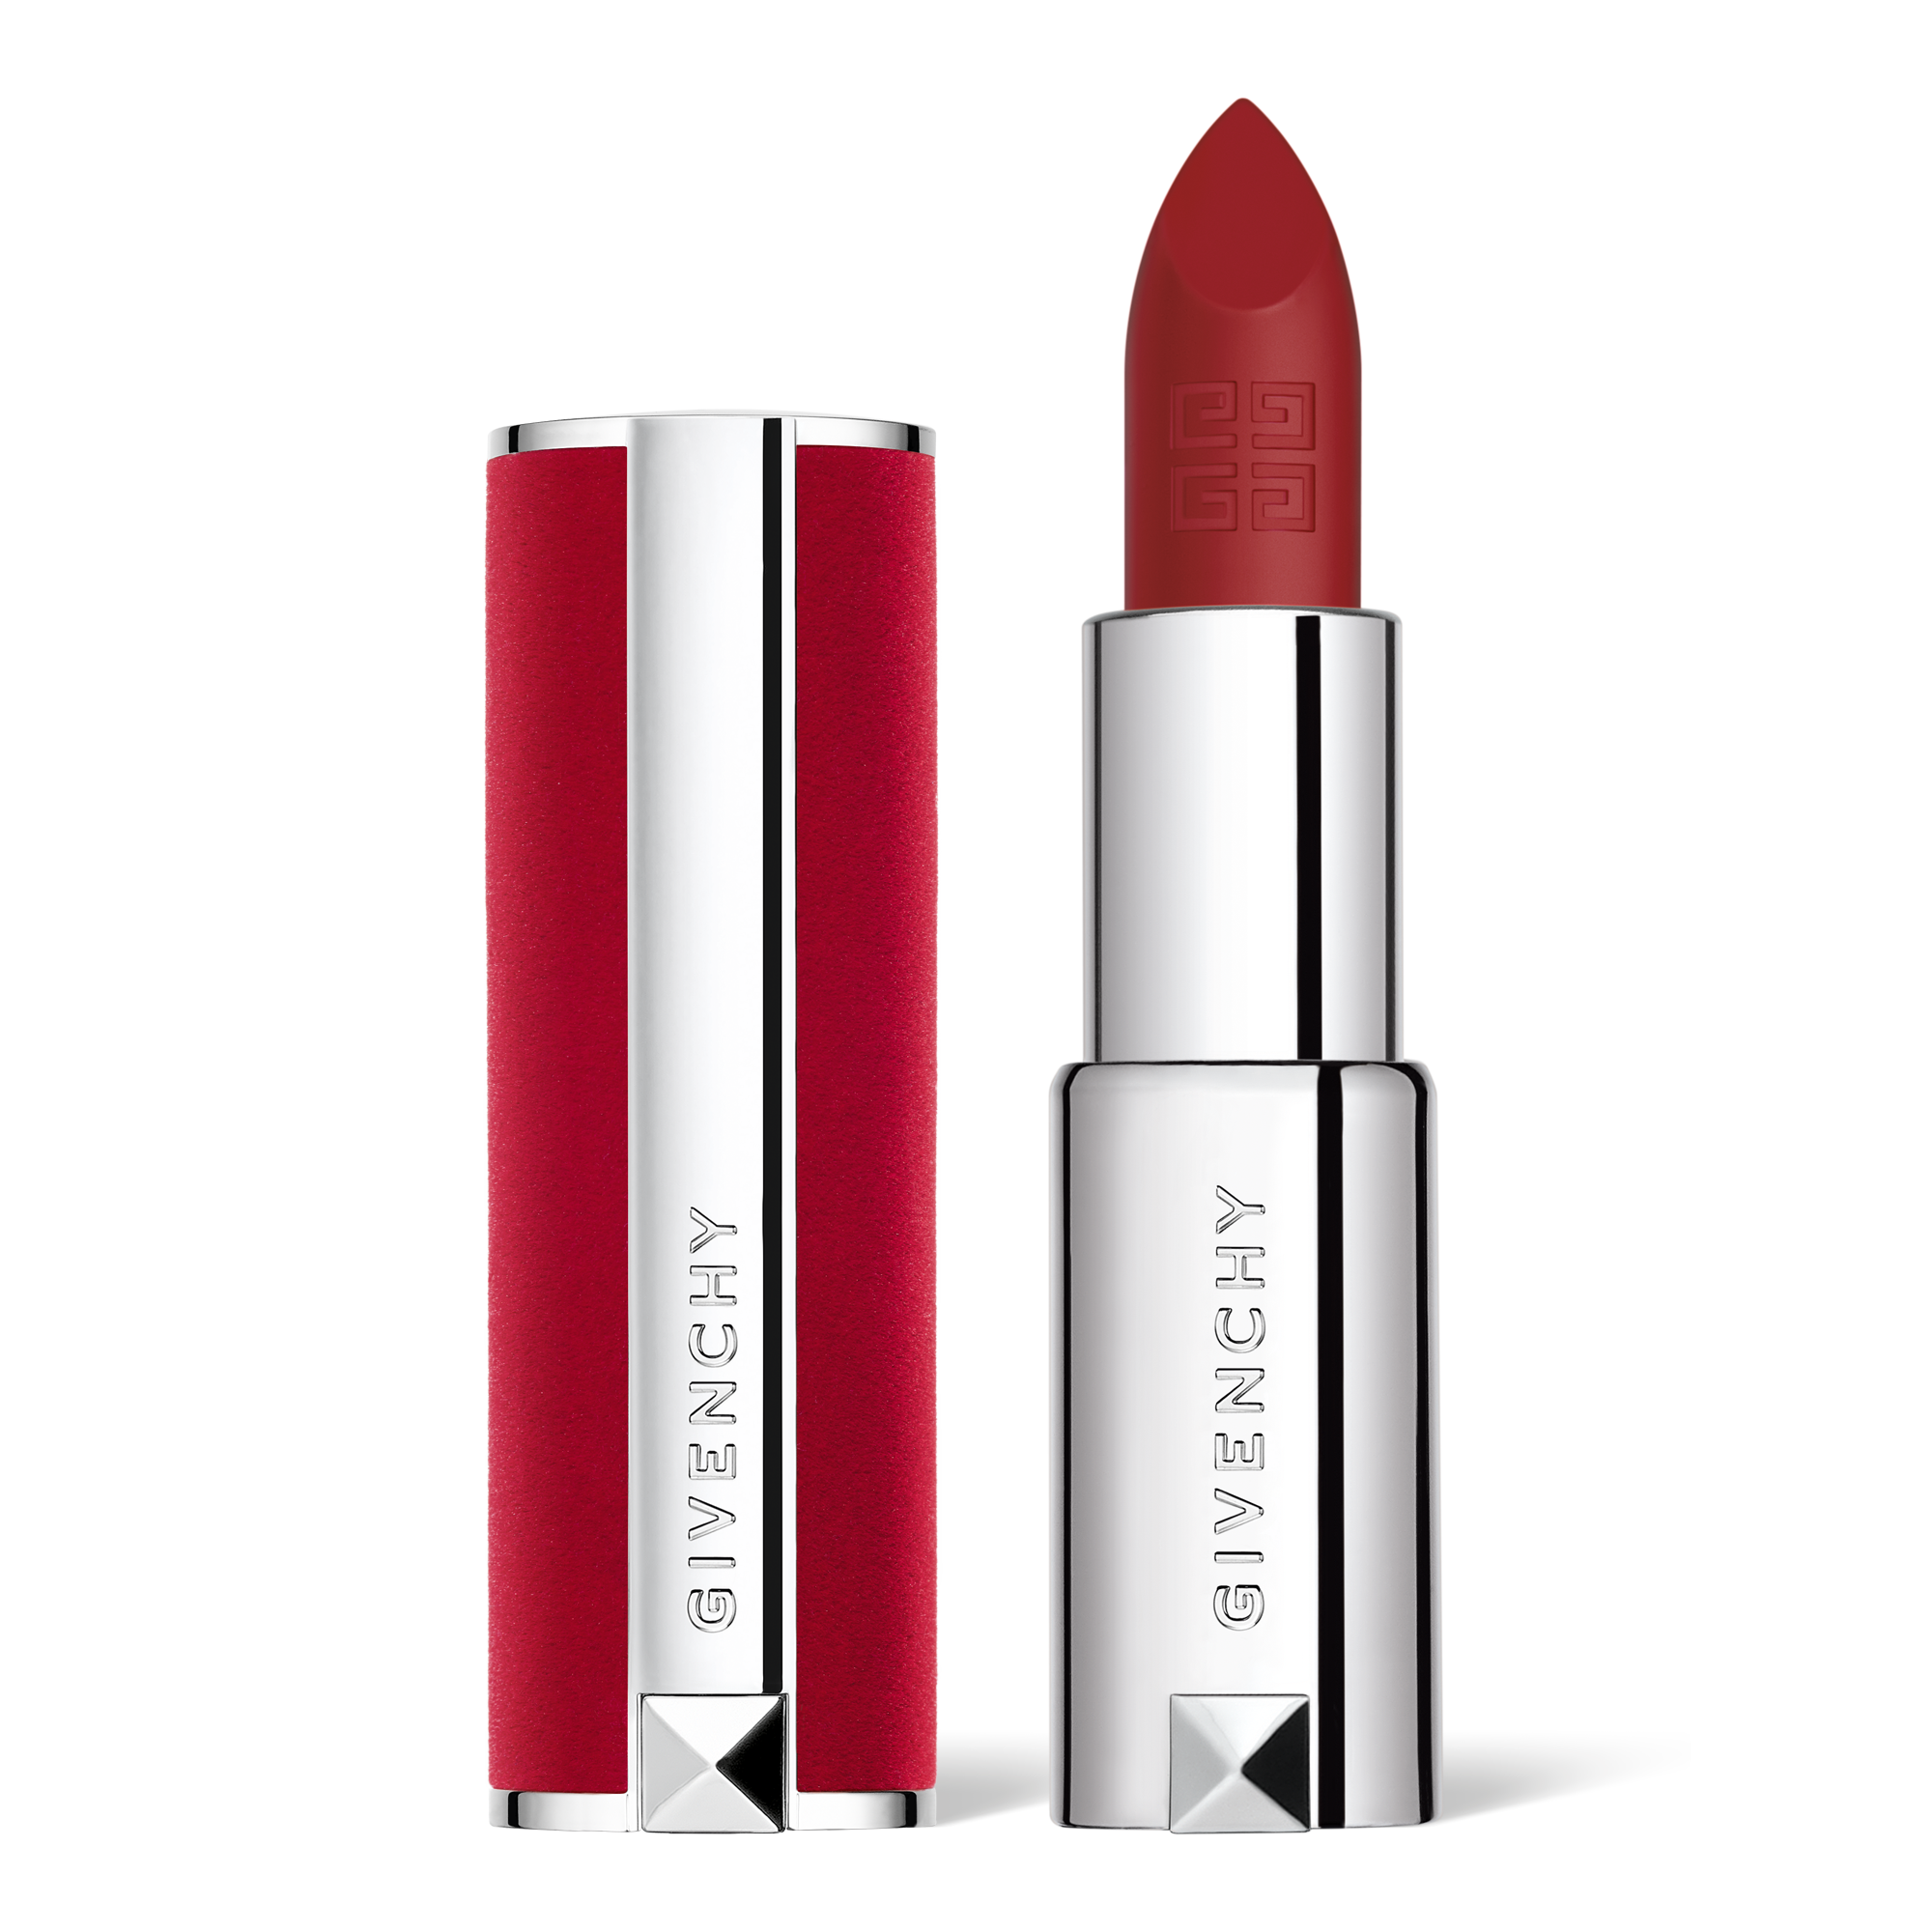 le rouge givenchy